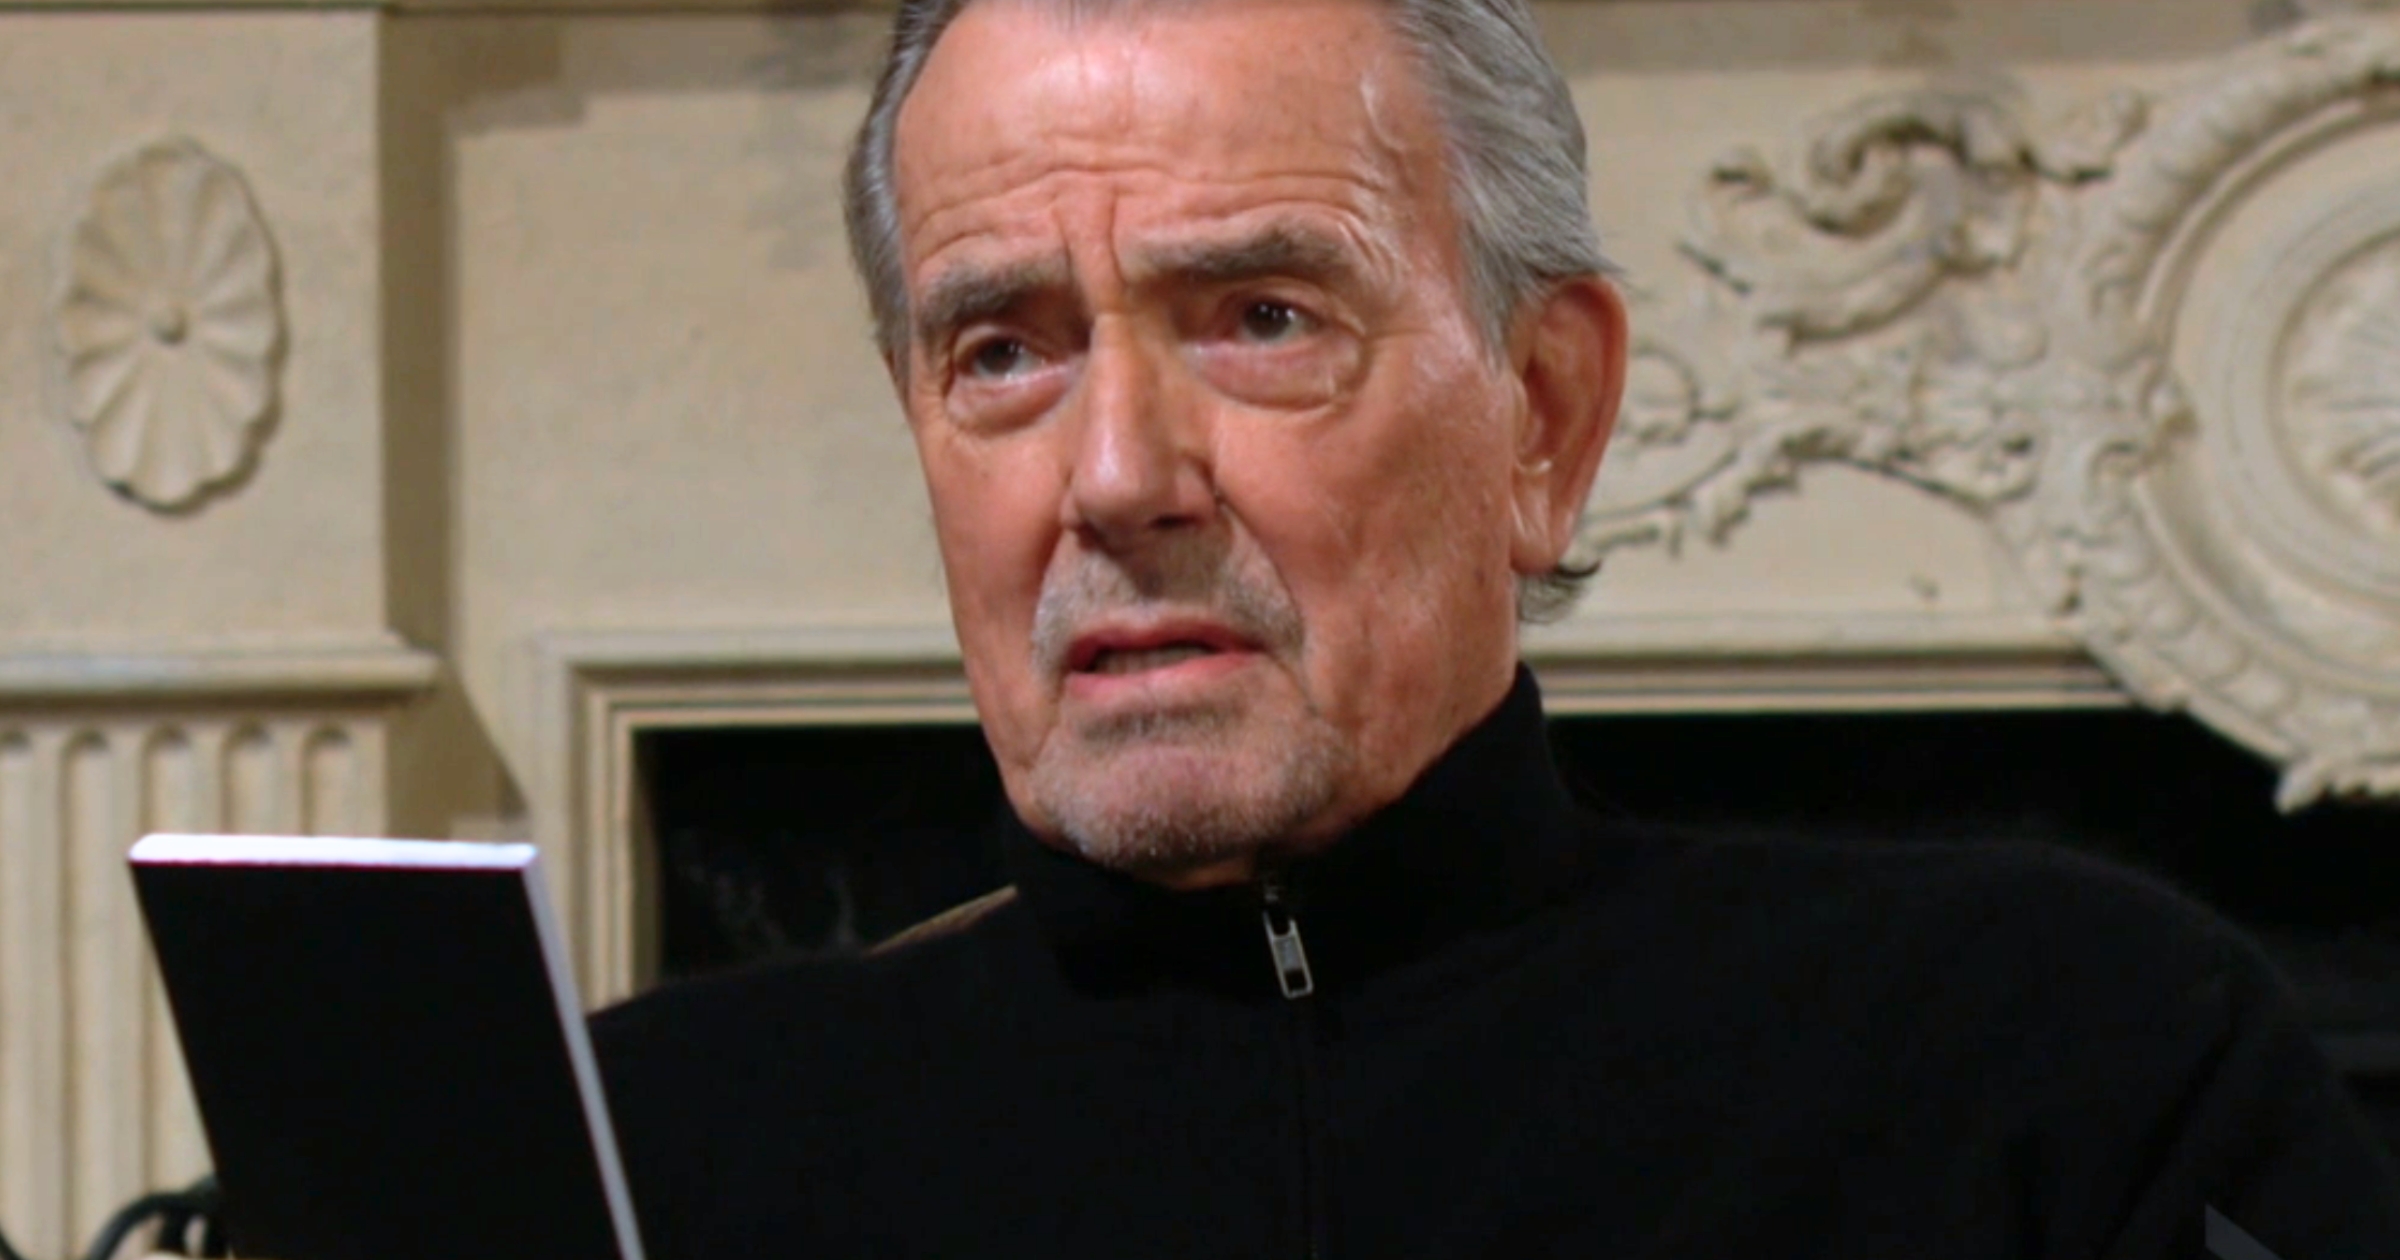 The Young and the Restless - Oct 25 - Victor